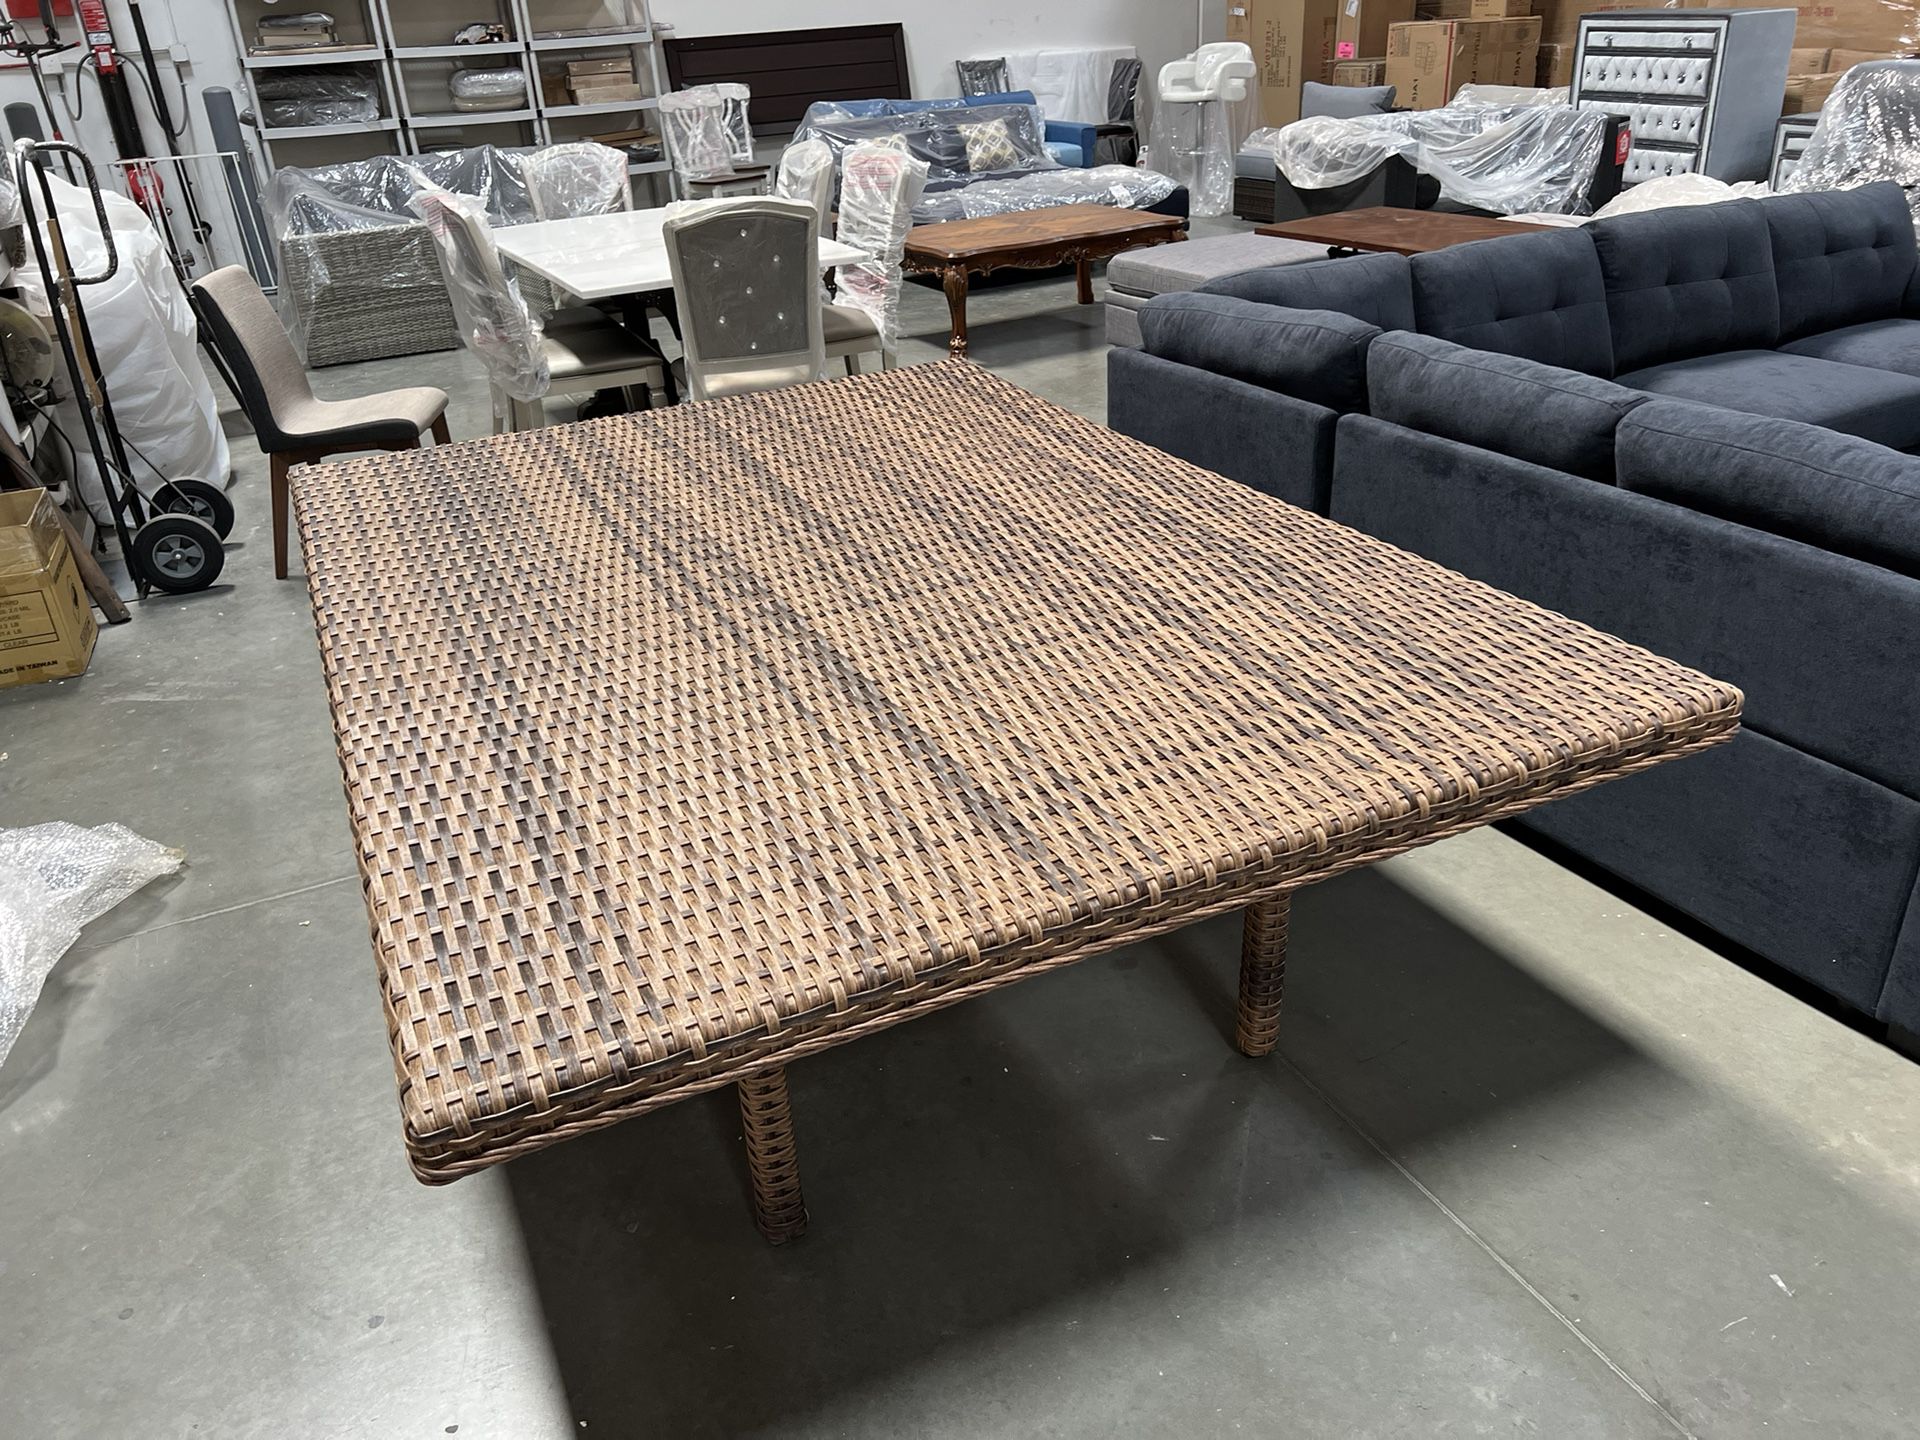 New! Large Patio Table, Wicker Furniture, PE Resin Wicker Table, Wicker Table Furniture, Patio Furniture, Outdoor Table